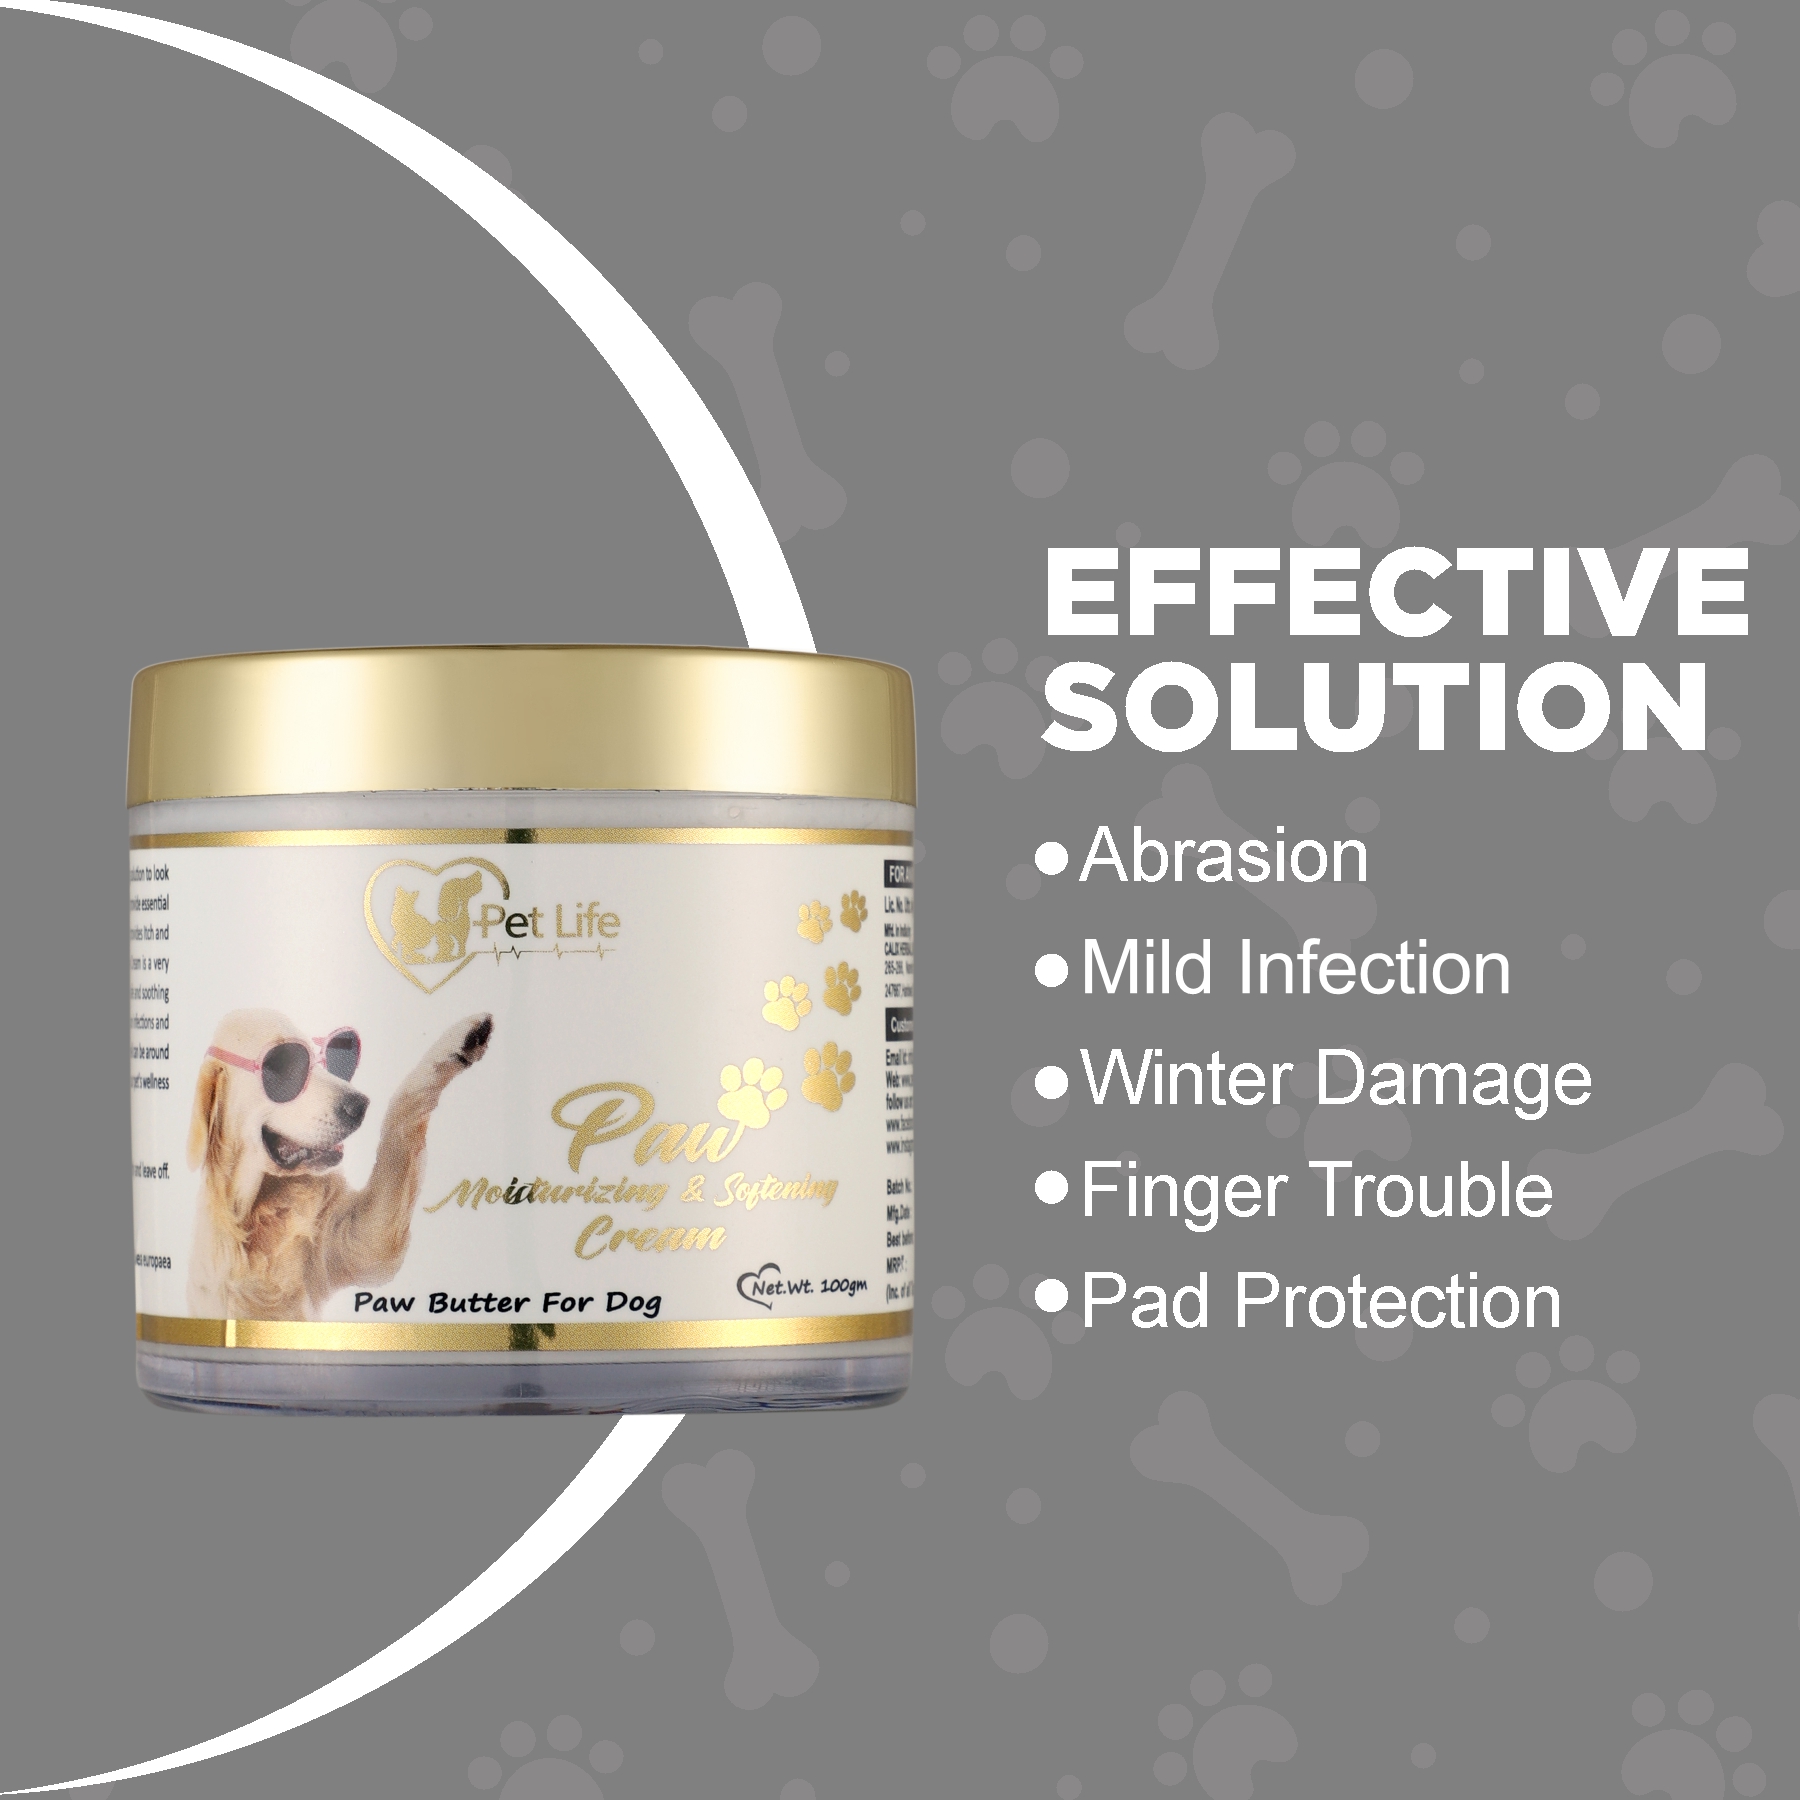 Pet Life Organic Paw Moisturizing & Softening Cream for Dog Cracked & Chapped Paws|Paw Butter Repair, Sooth & Heals Dry Paw & Elbow|Paw Butter Cream for All Dog Breeds - Safe Pet Friendly